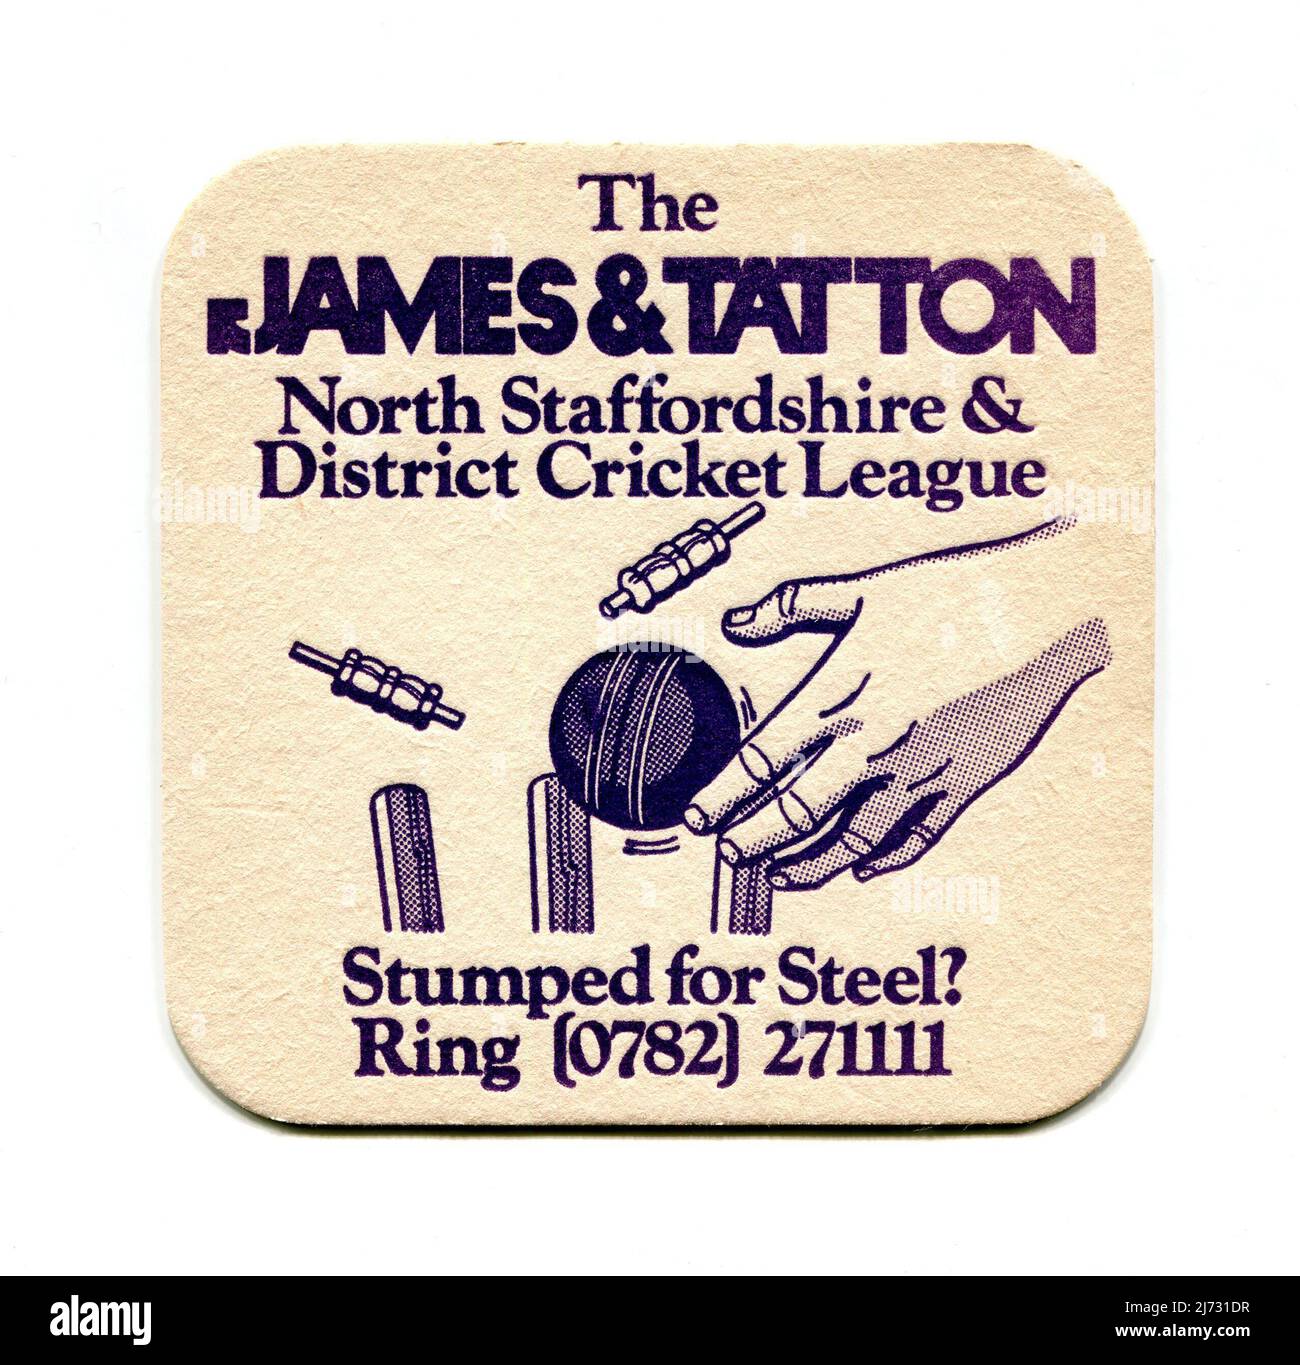 A vintage beer mat produced as a promotional item for the James & Tatton steel company, advertising its sponsorship of the North Staffordshire & District Cricket League. Stock Photo